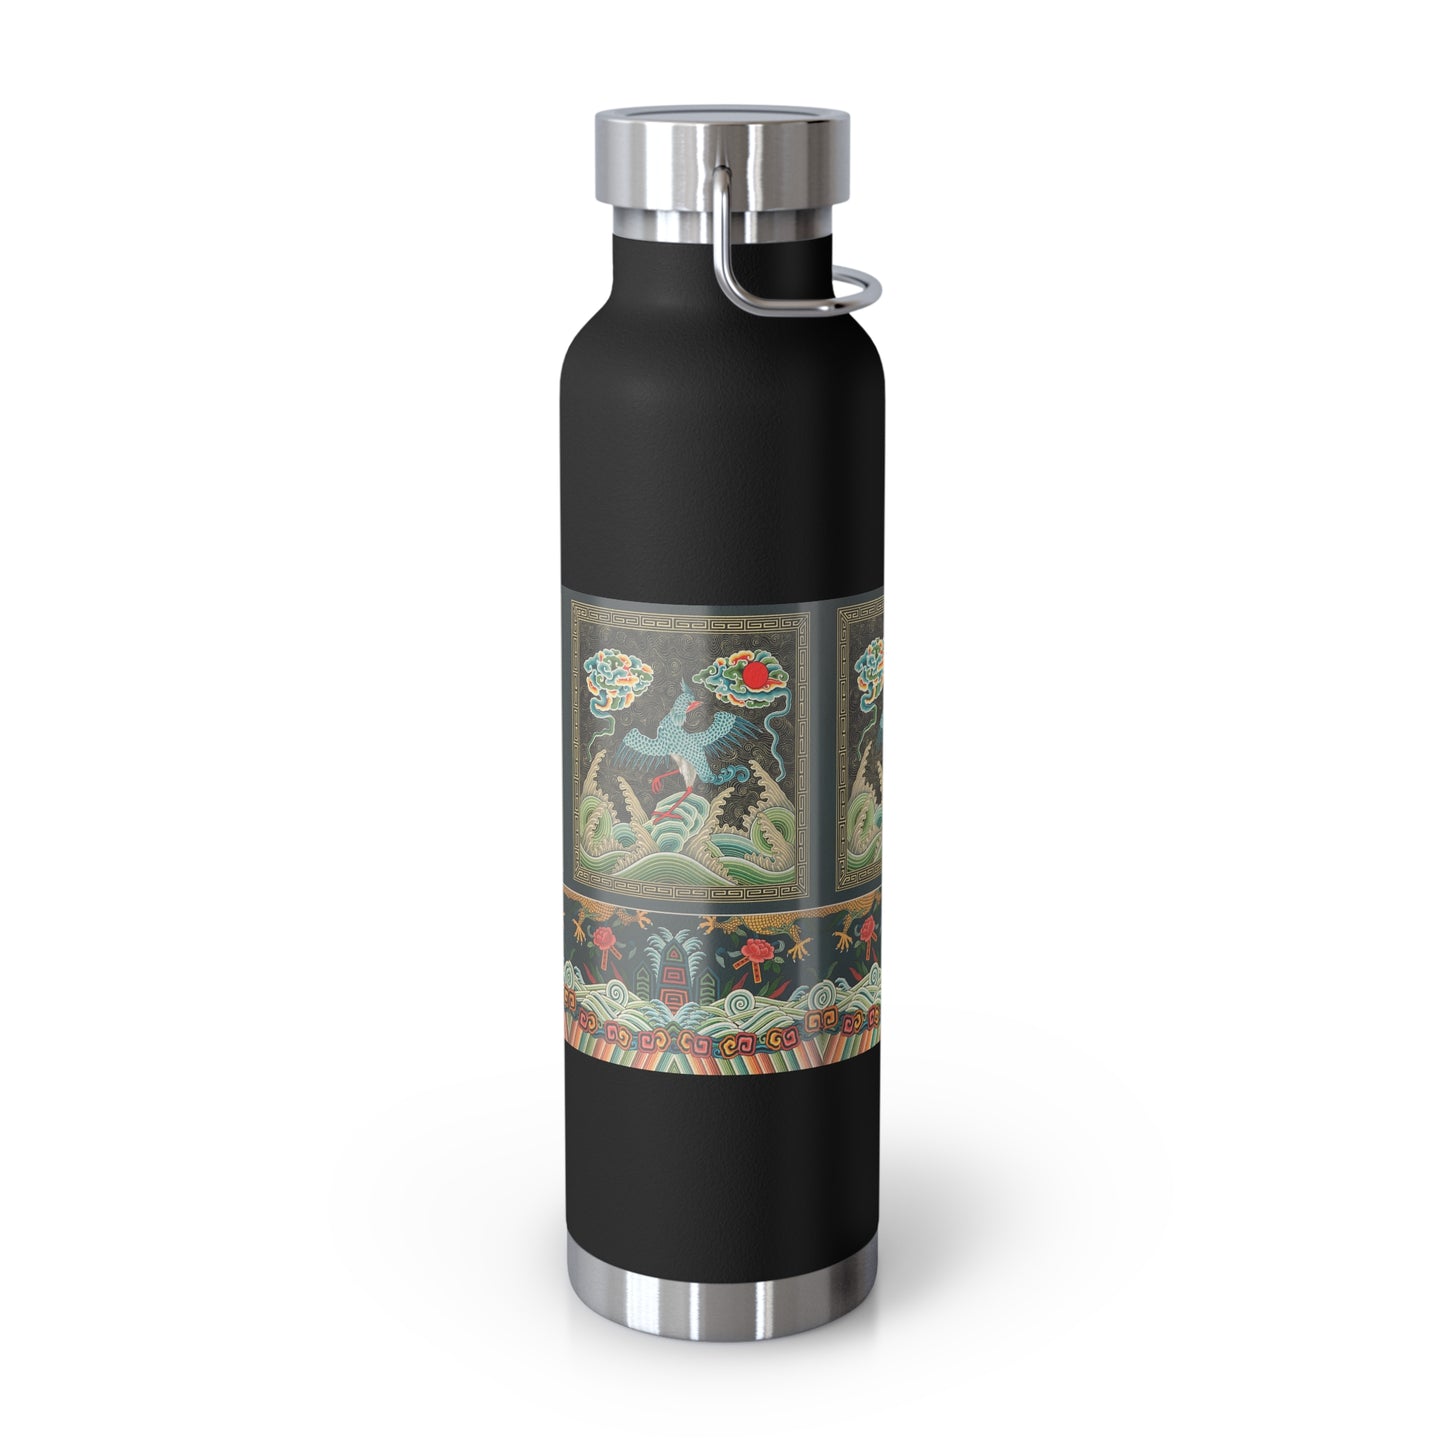 Chinois L'ornement Polychrome by Albert Racine (1825-1893)  Vacuum Insulated Bottle, 22oz